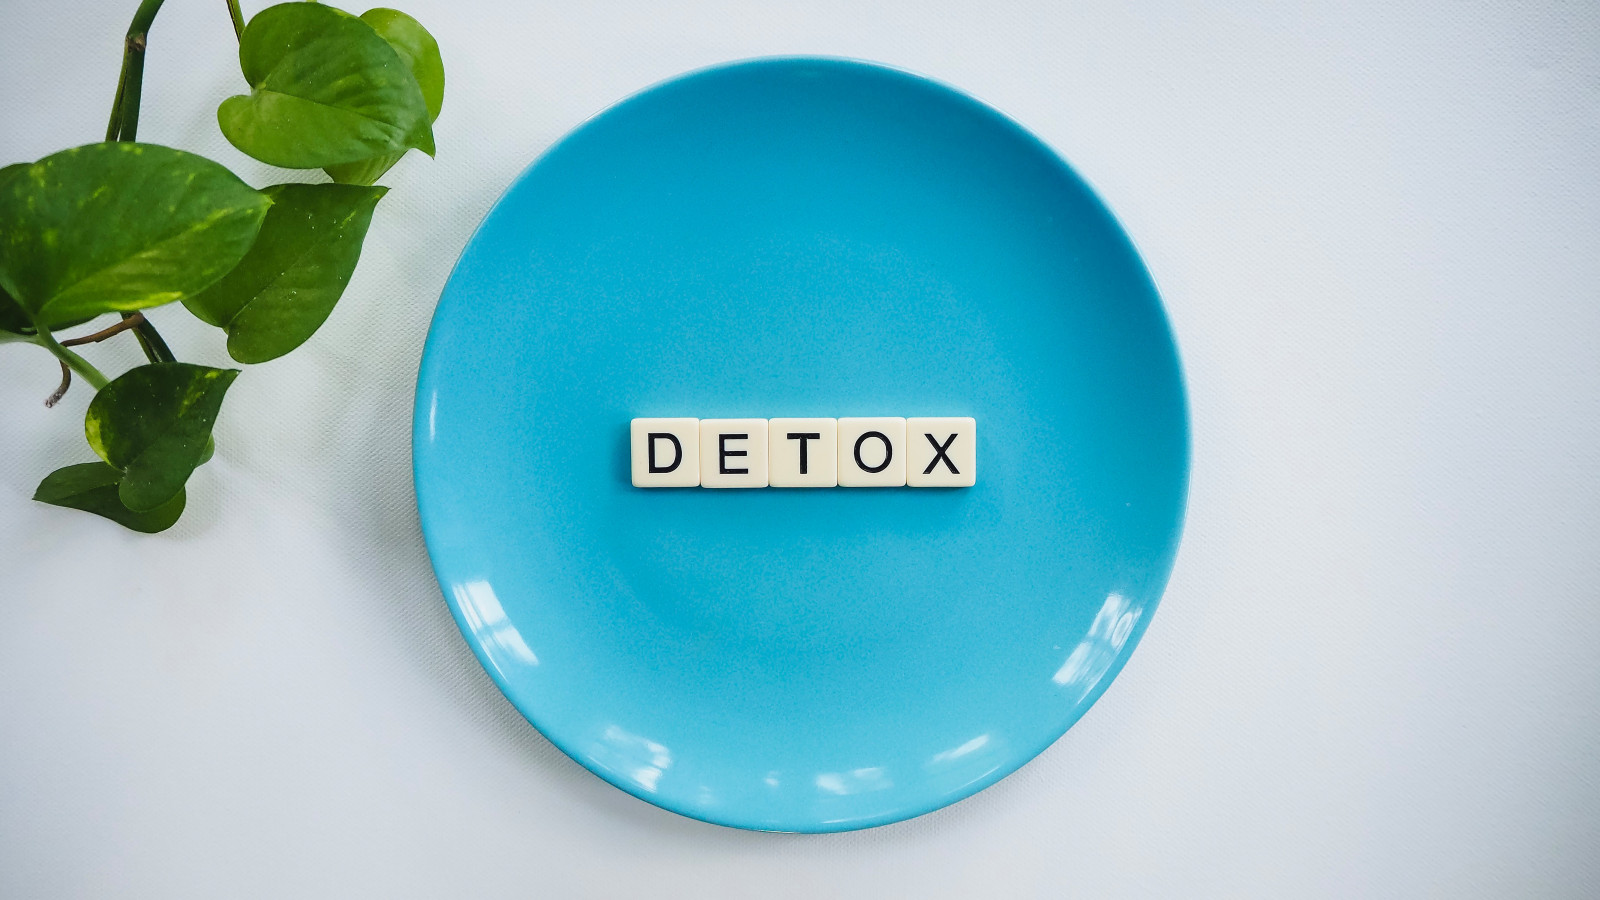 Unlocking the Anti-Inflammatory Power with a 5-Day "Fasting-Mimicking" Ketosis Detox